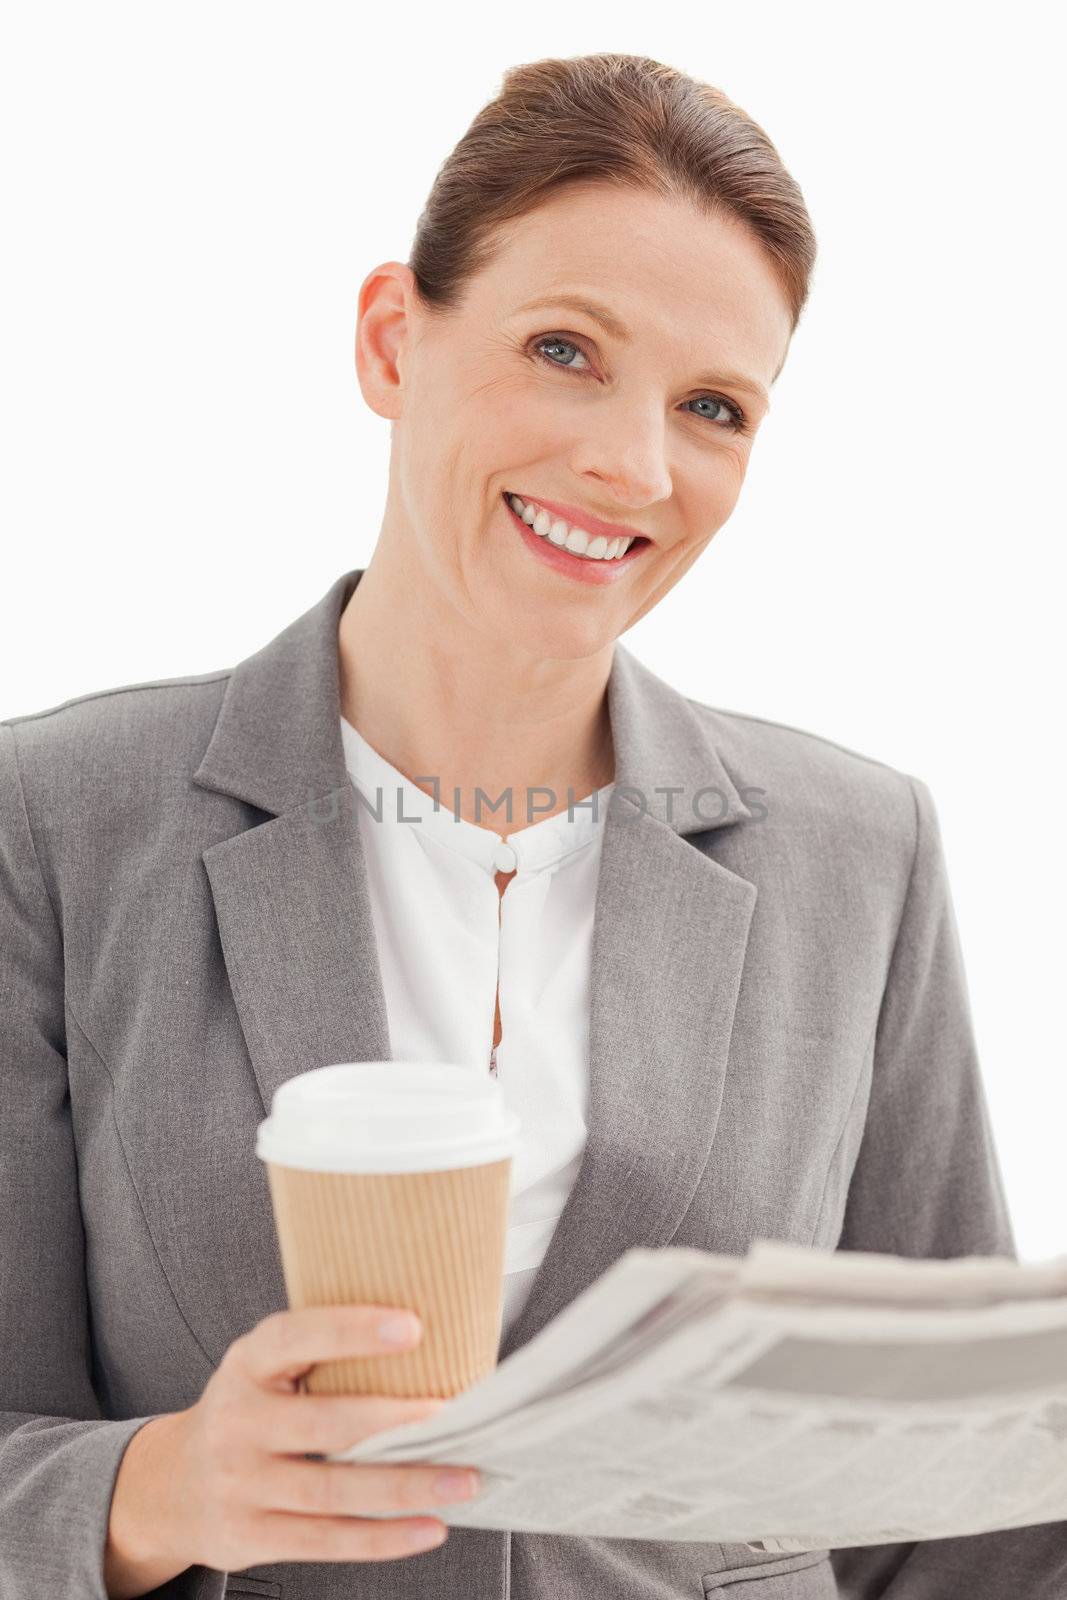 Smiling businesswoman holding newspaper and cup by Wavebreakmedia